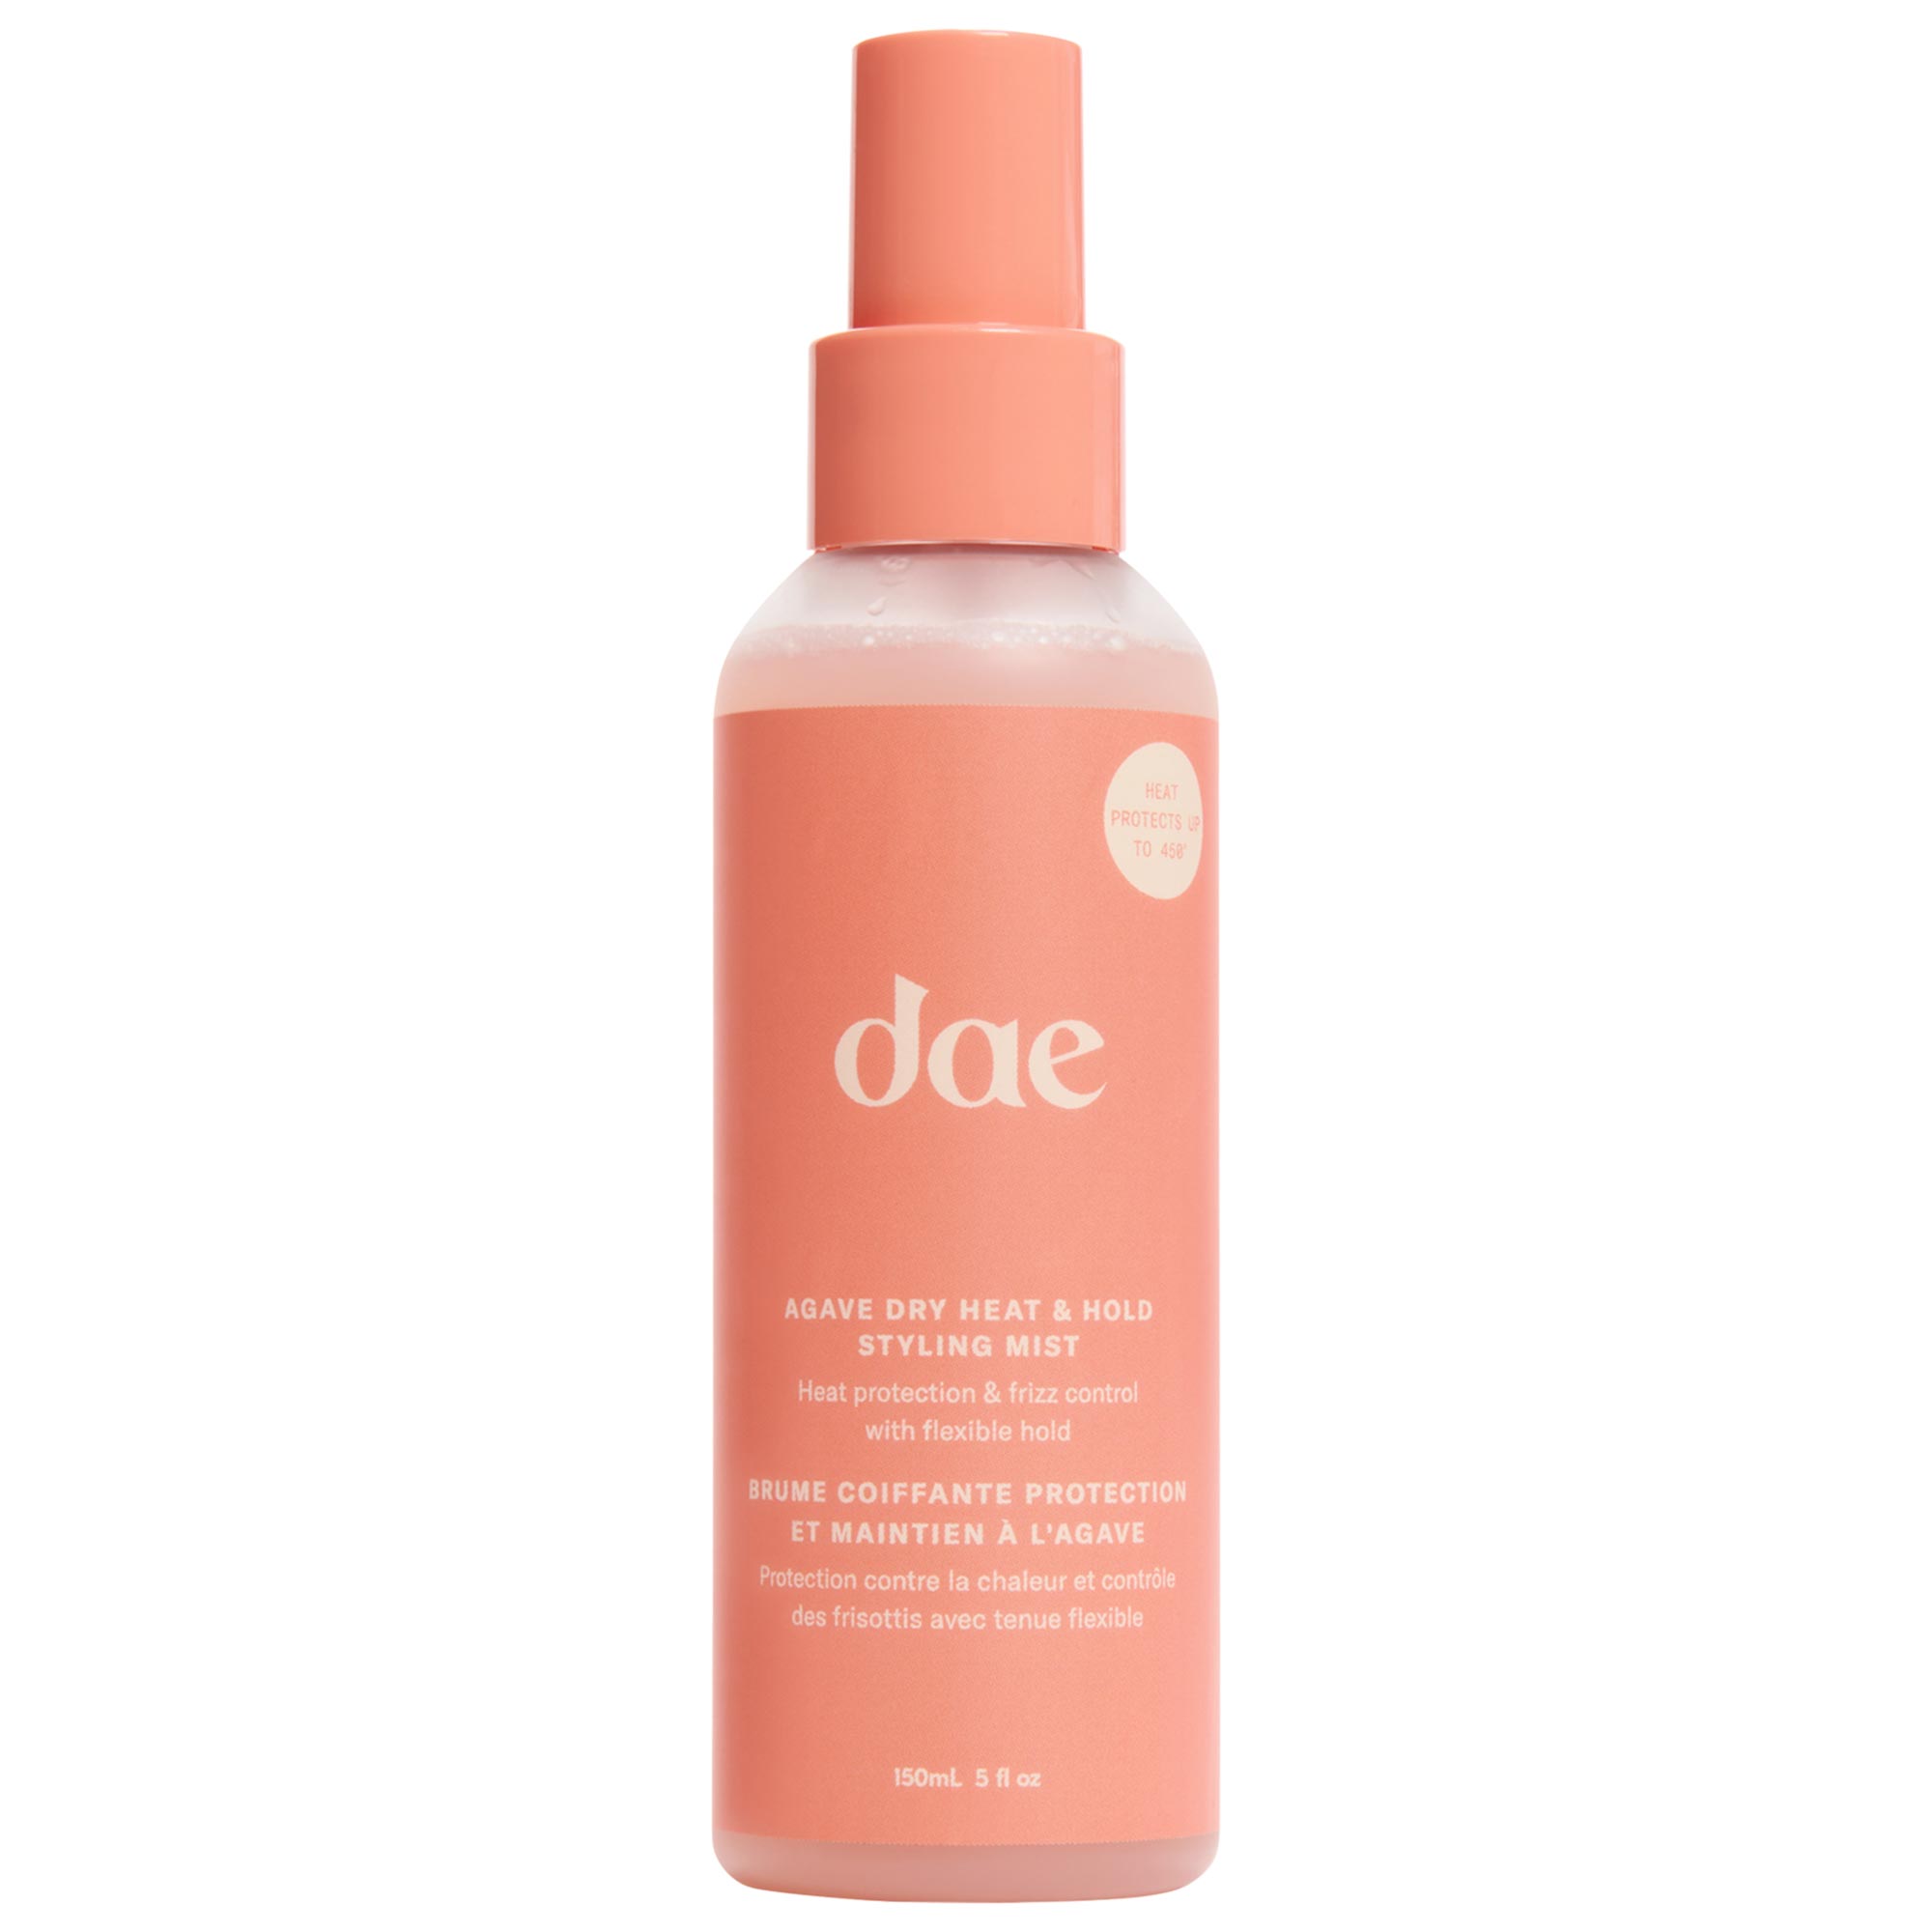 Agave Dry Heat Protection & Hold Styling Mist Dae